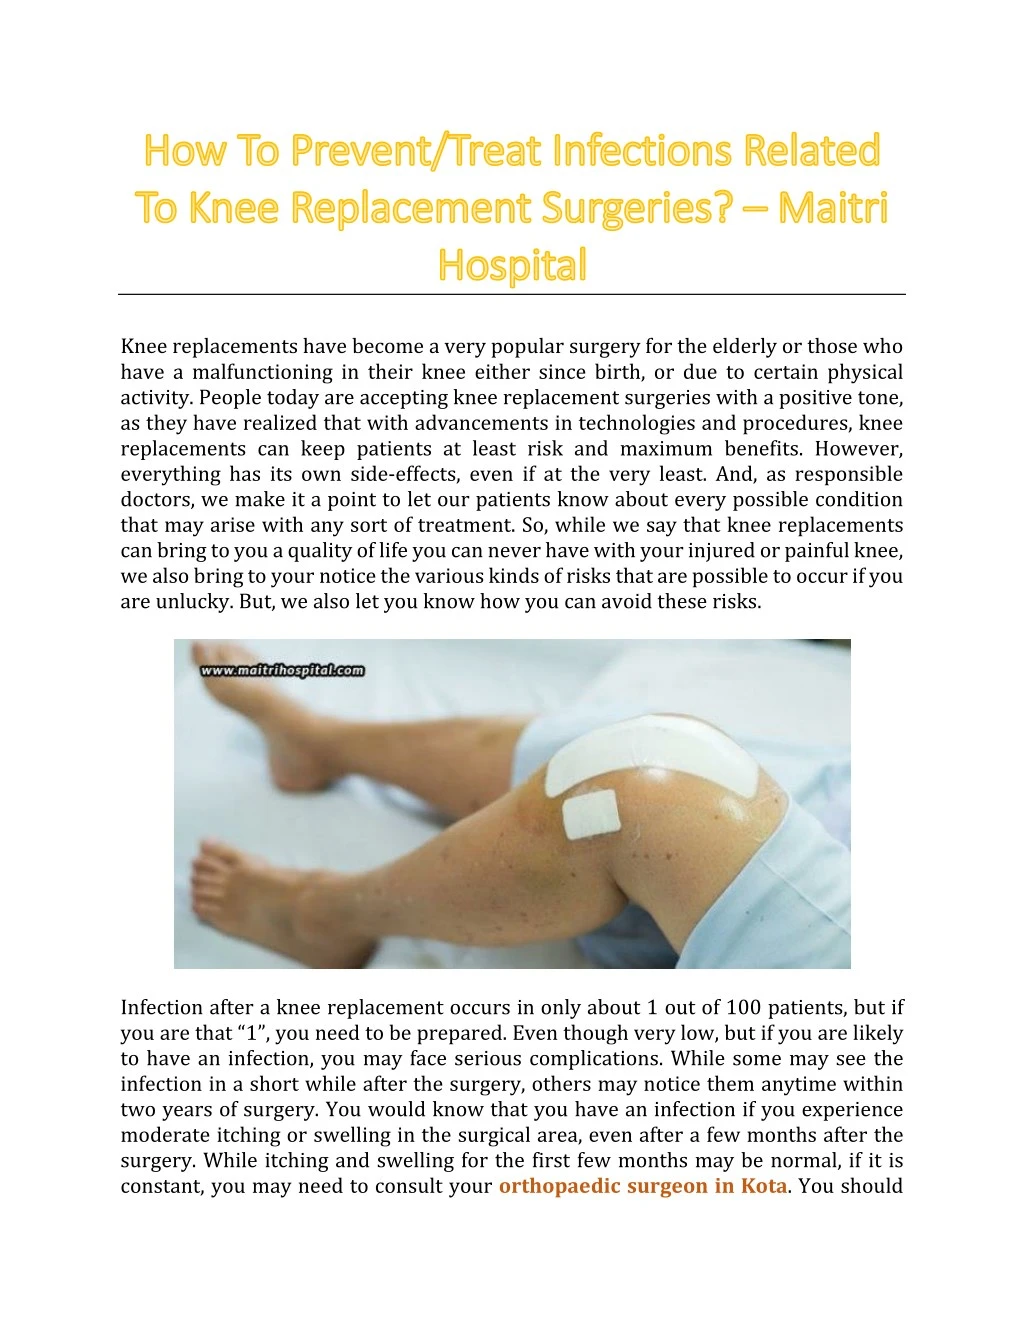 knee replacements have become a very popular